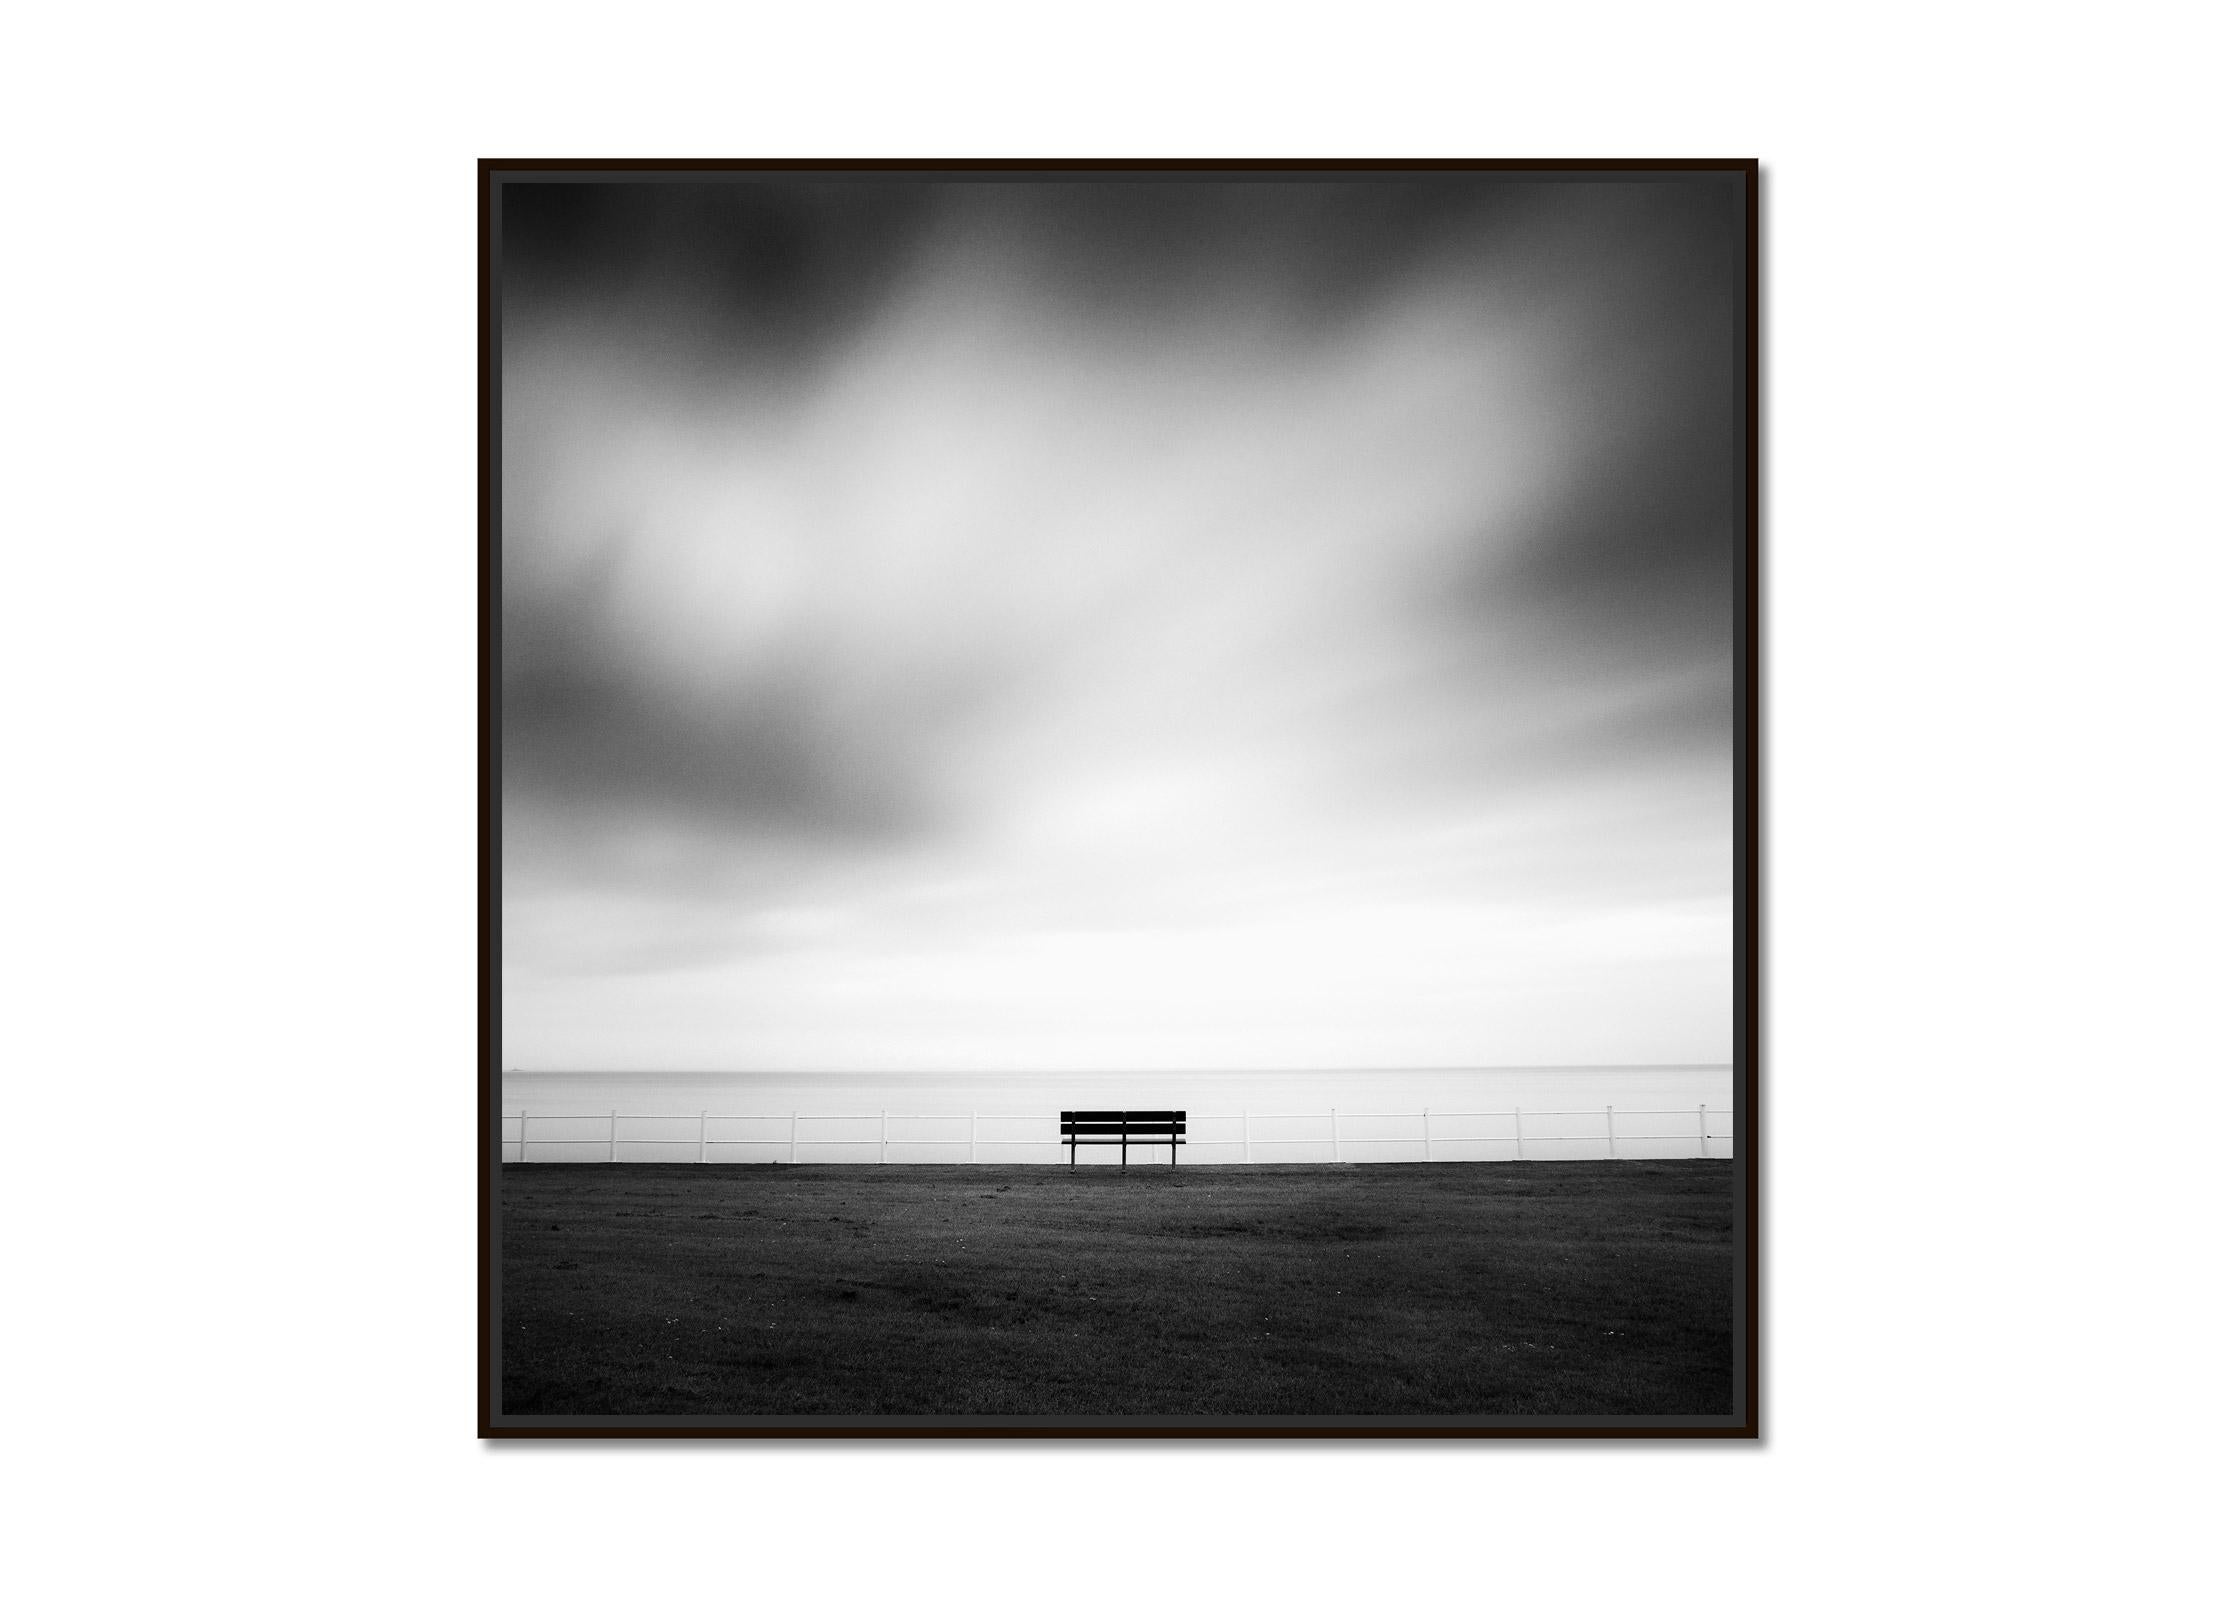 Quiet morning in the Park, seaside, Ireland black & white landscape photography - Photograph by Gerald Berghammer